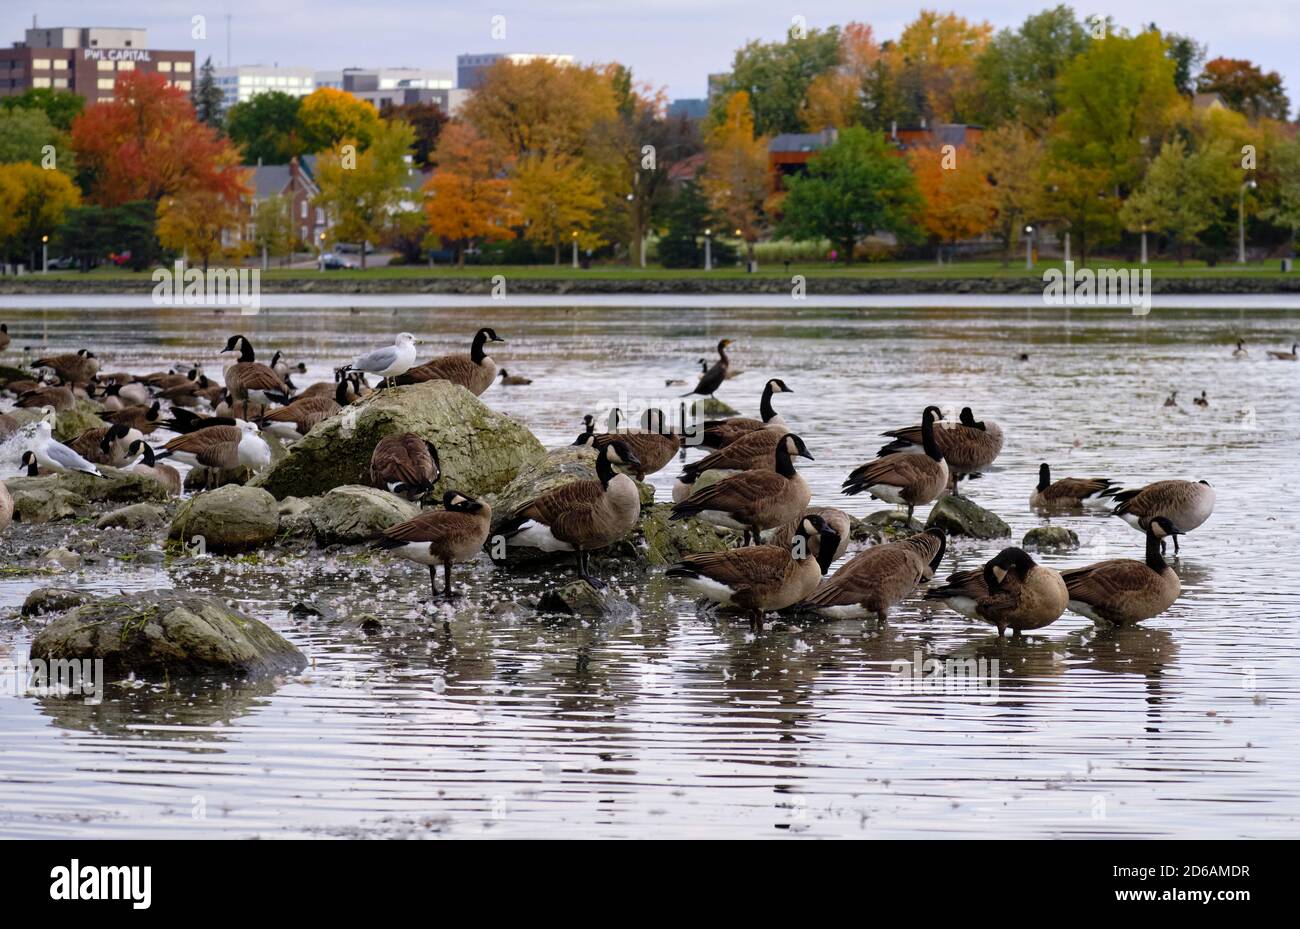 Ottawa, Canada. October 15th, 2020. Canada Geese (latin Branta canadensis)  leaving heading south after a migration stop on Dow's Lake on the Rideau  Canal on a mild autumn day. Most Canada geese